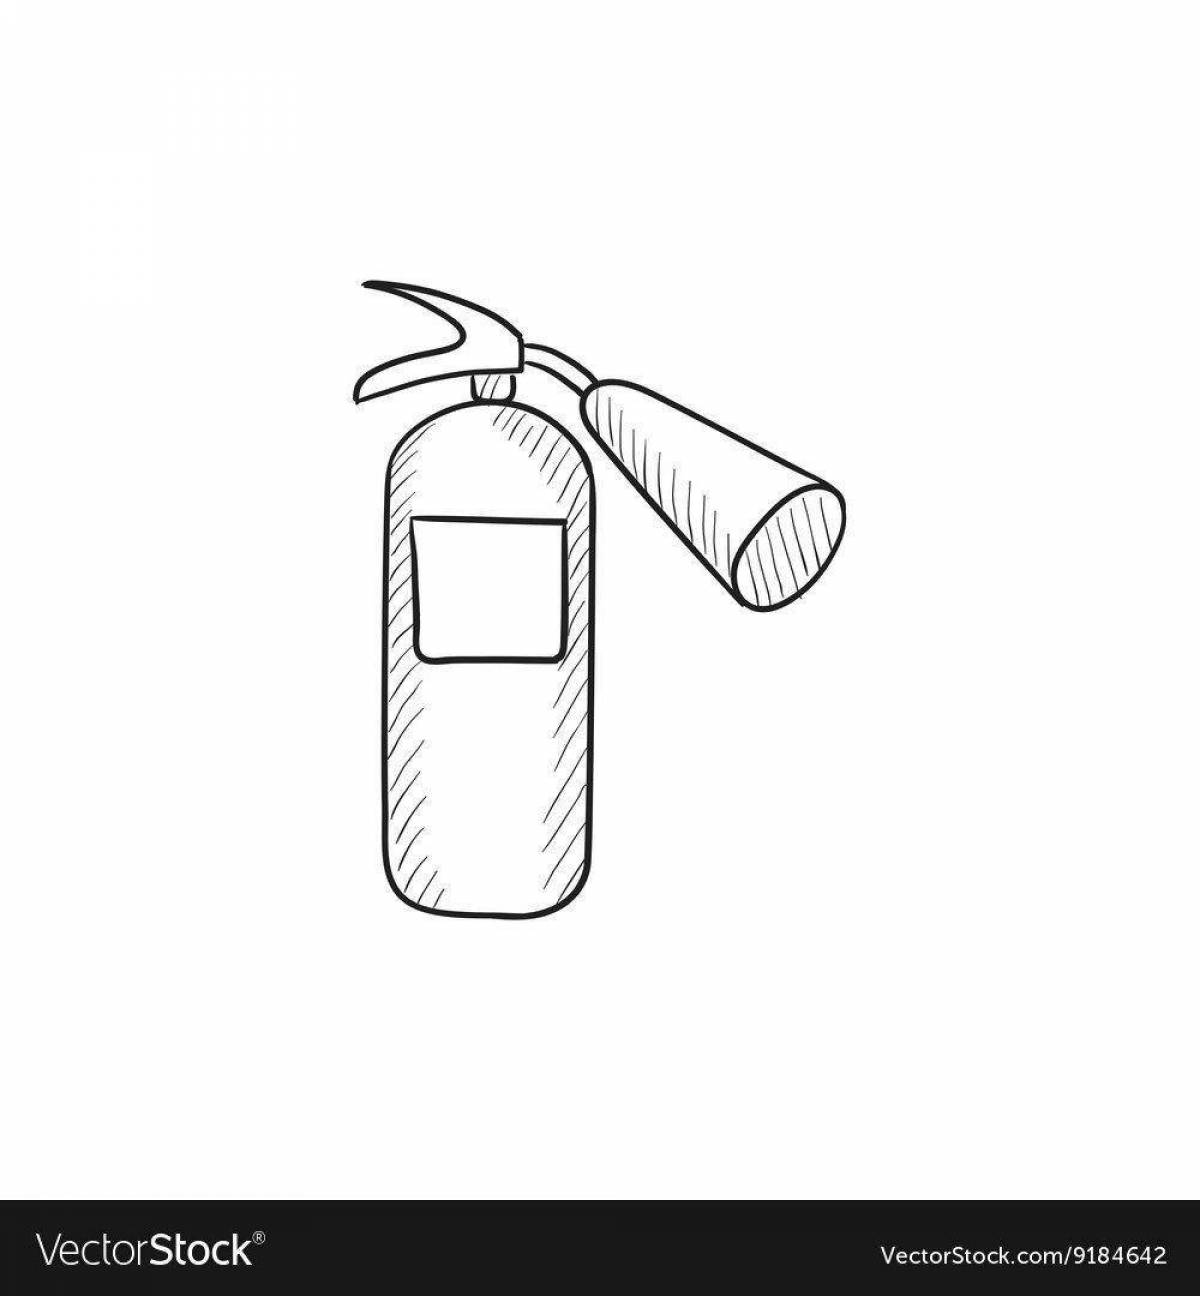 Inviting fire extinguisher coloring page